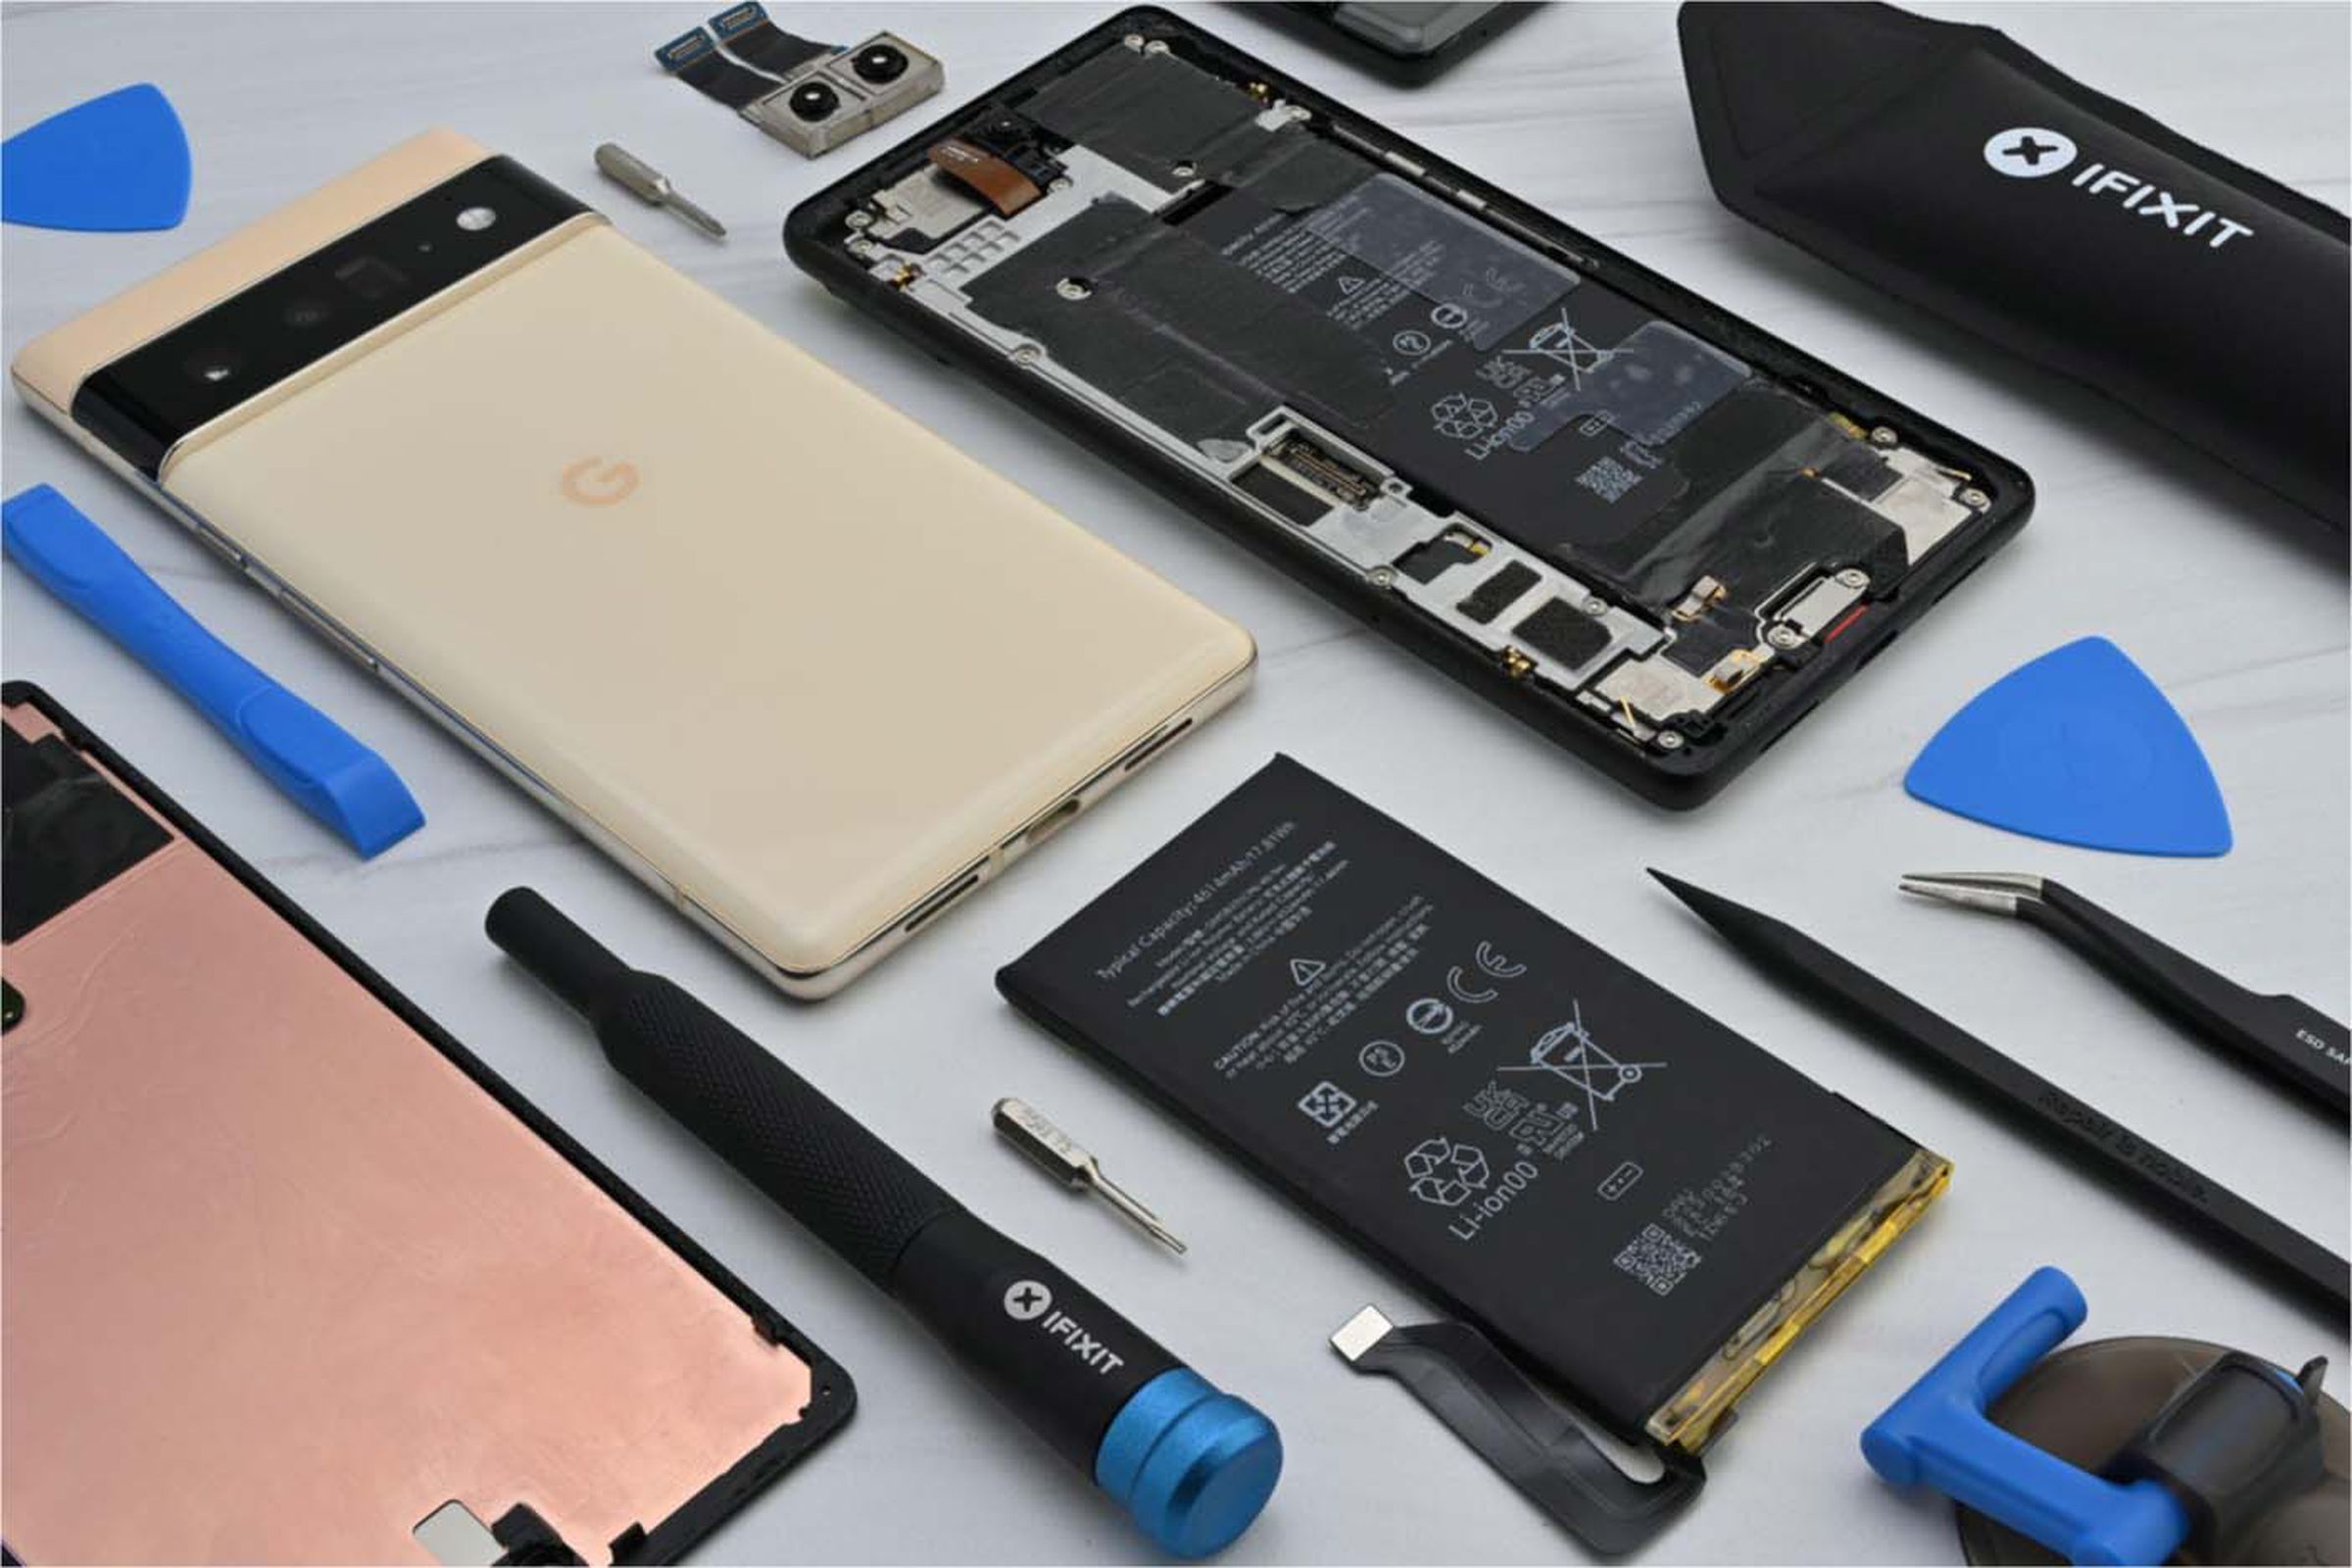 A Google Pixel smartphone surrounded by iFixit repair tools.